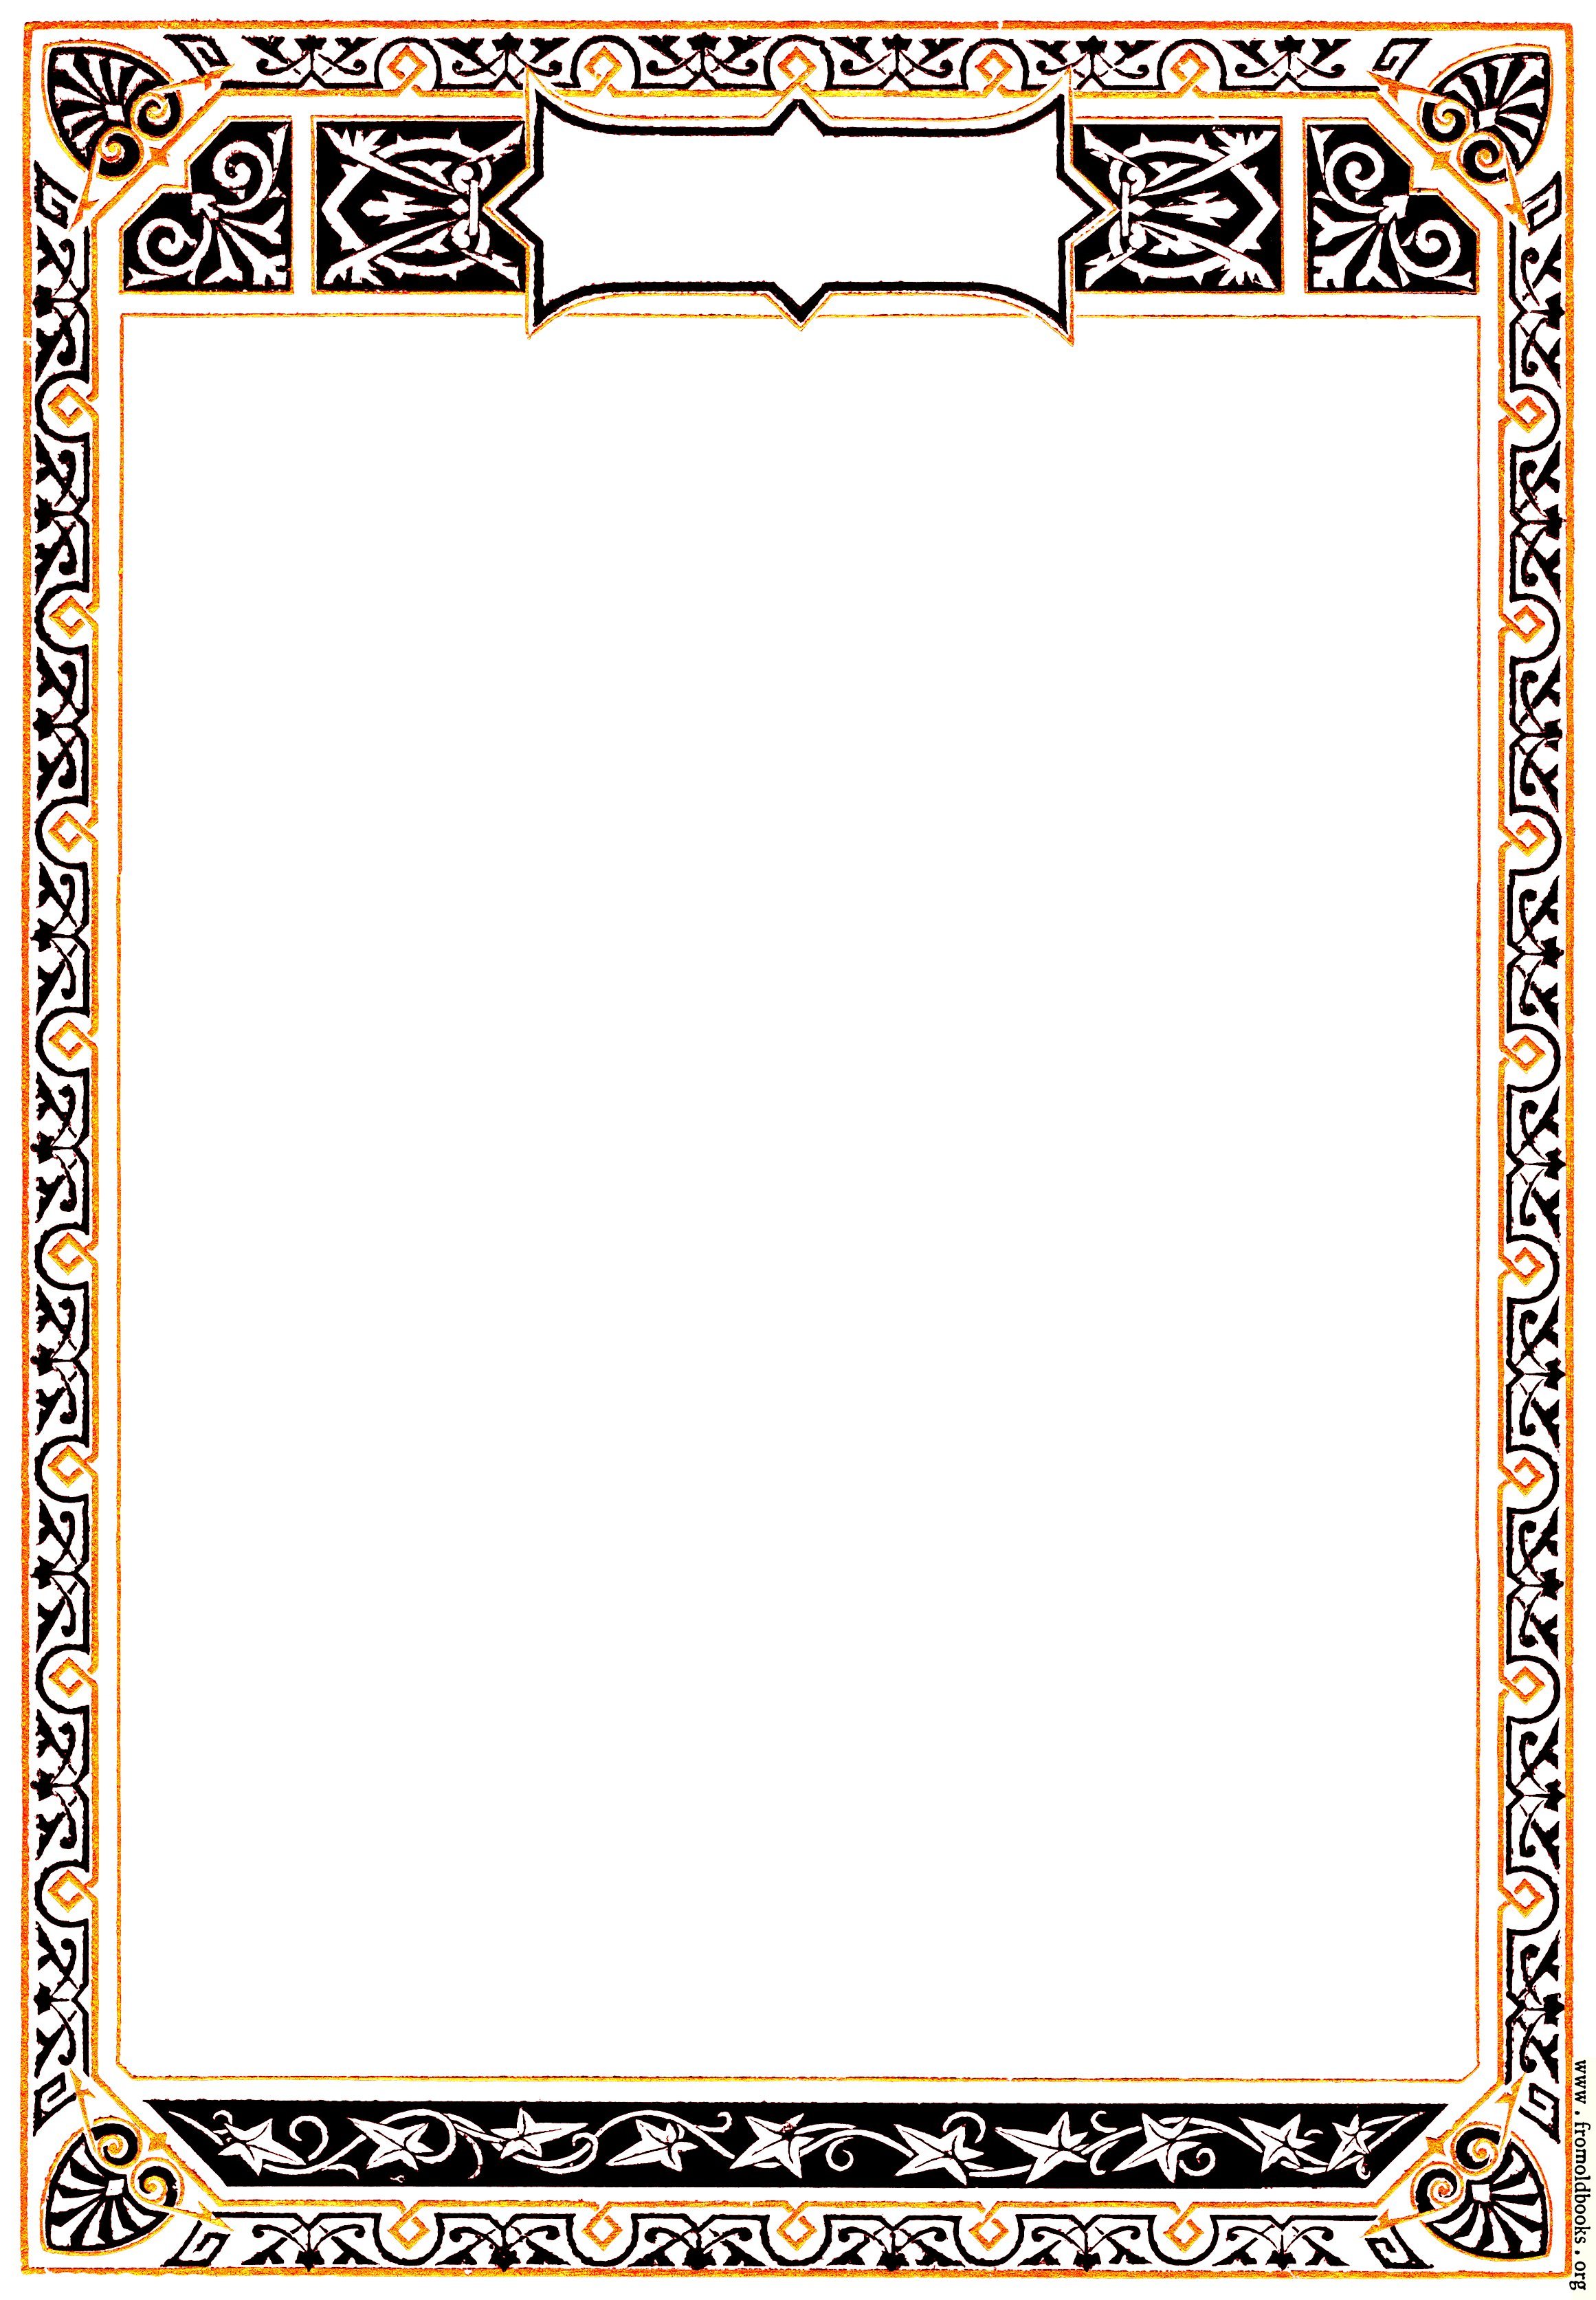 Ornate Early Victorian full-page Geometric Border [image 119x172 pixels 75]